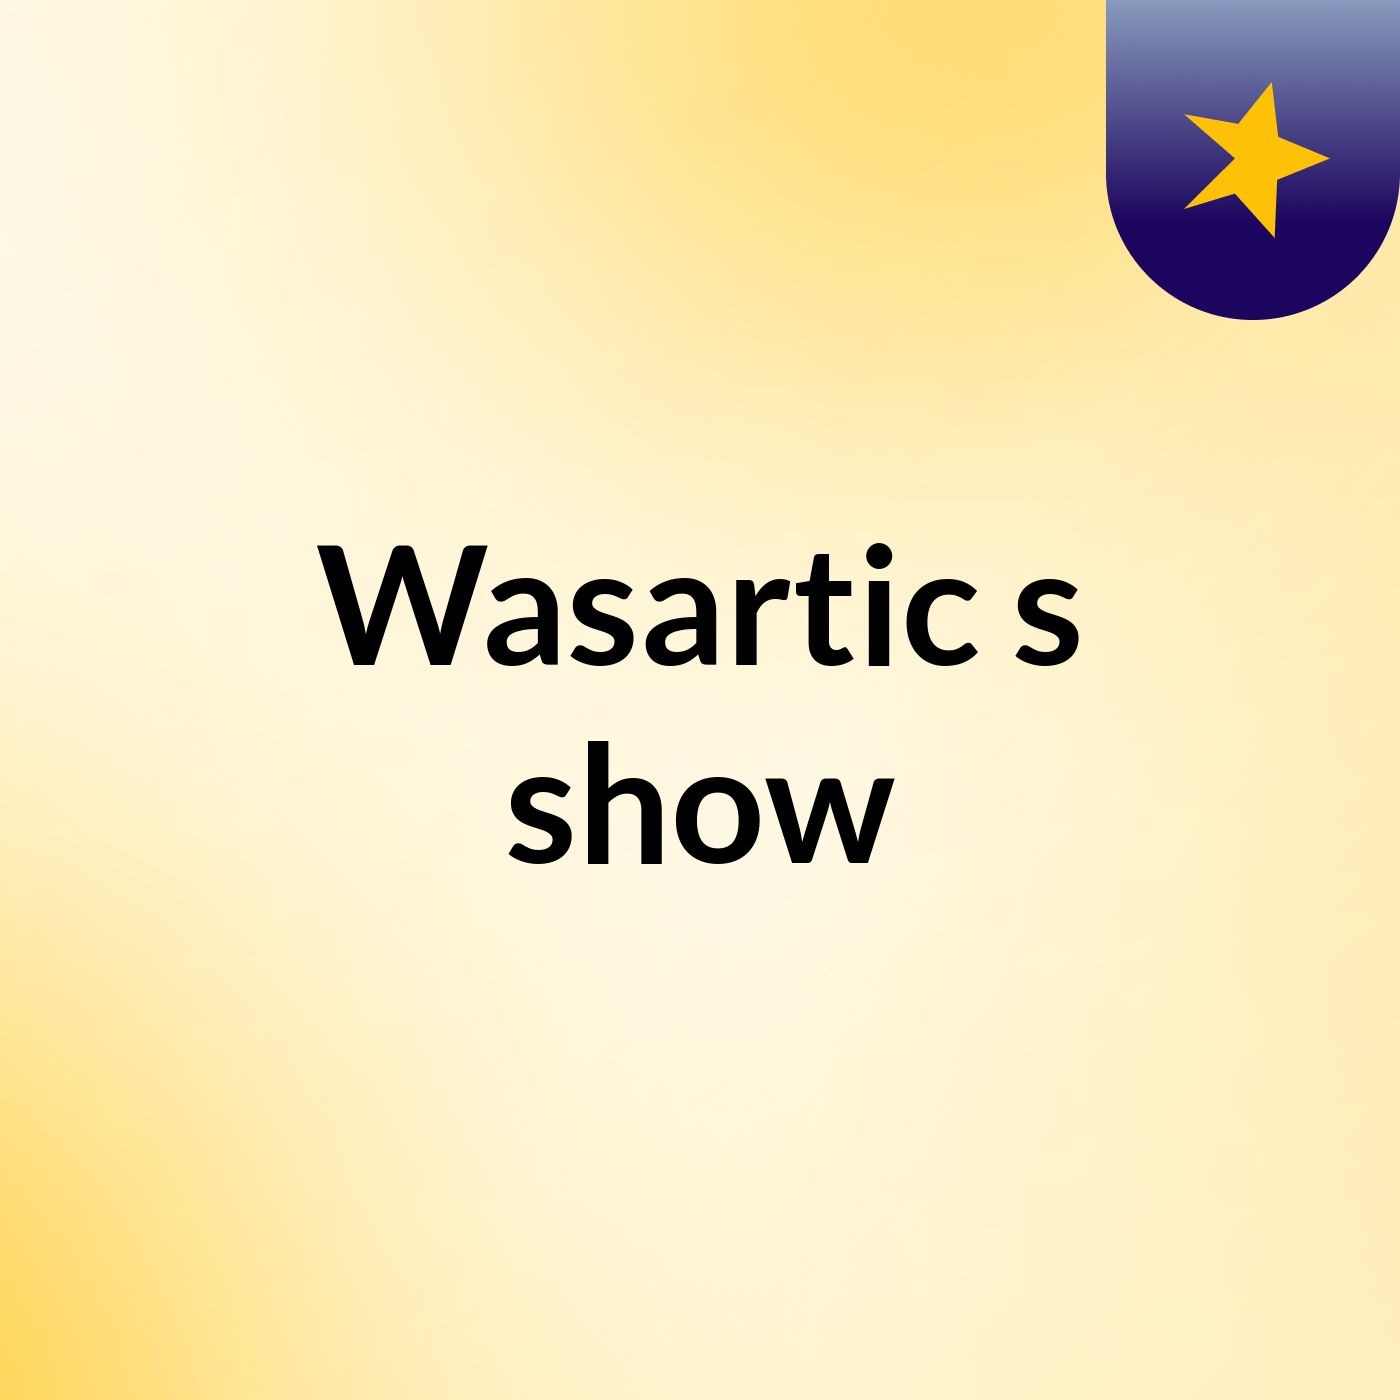 Wasartic's show